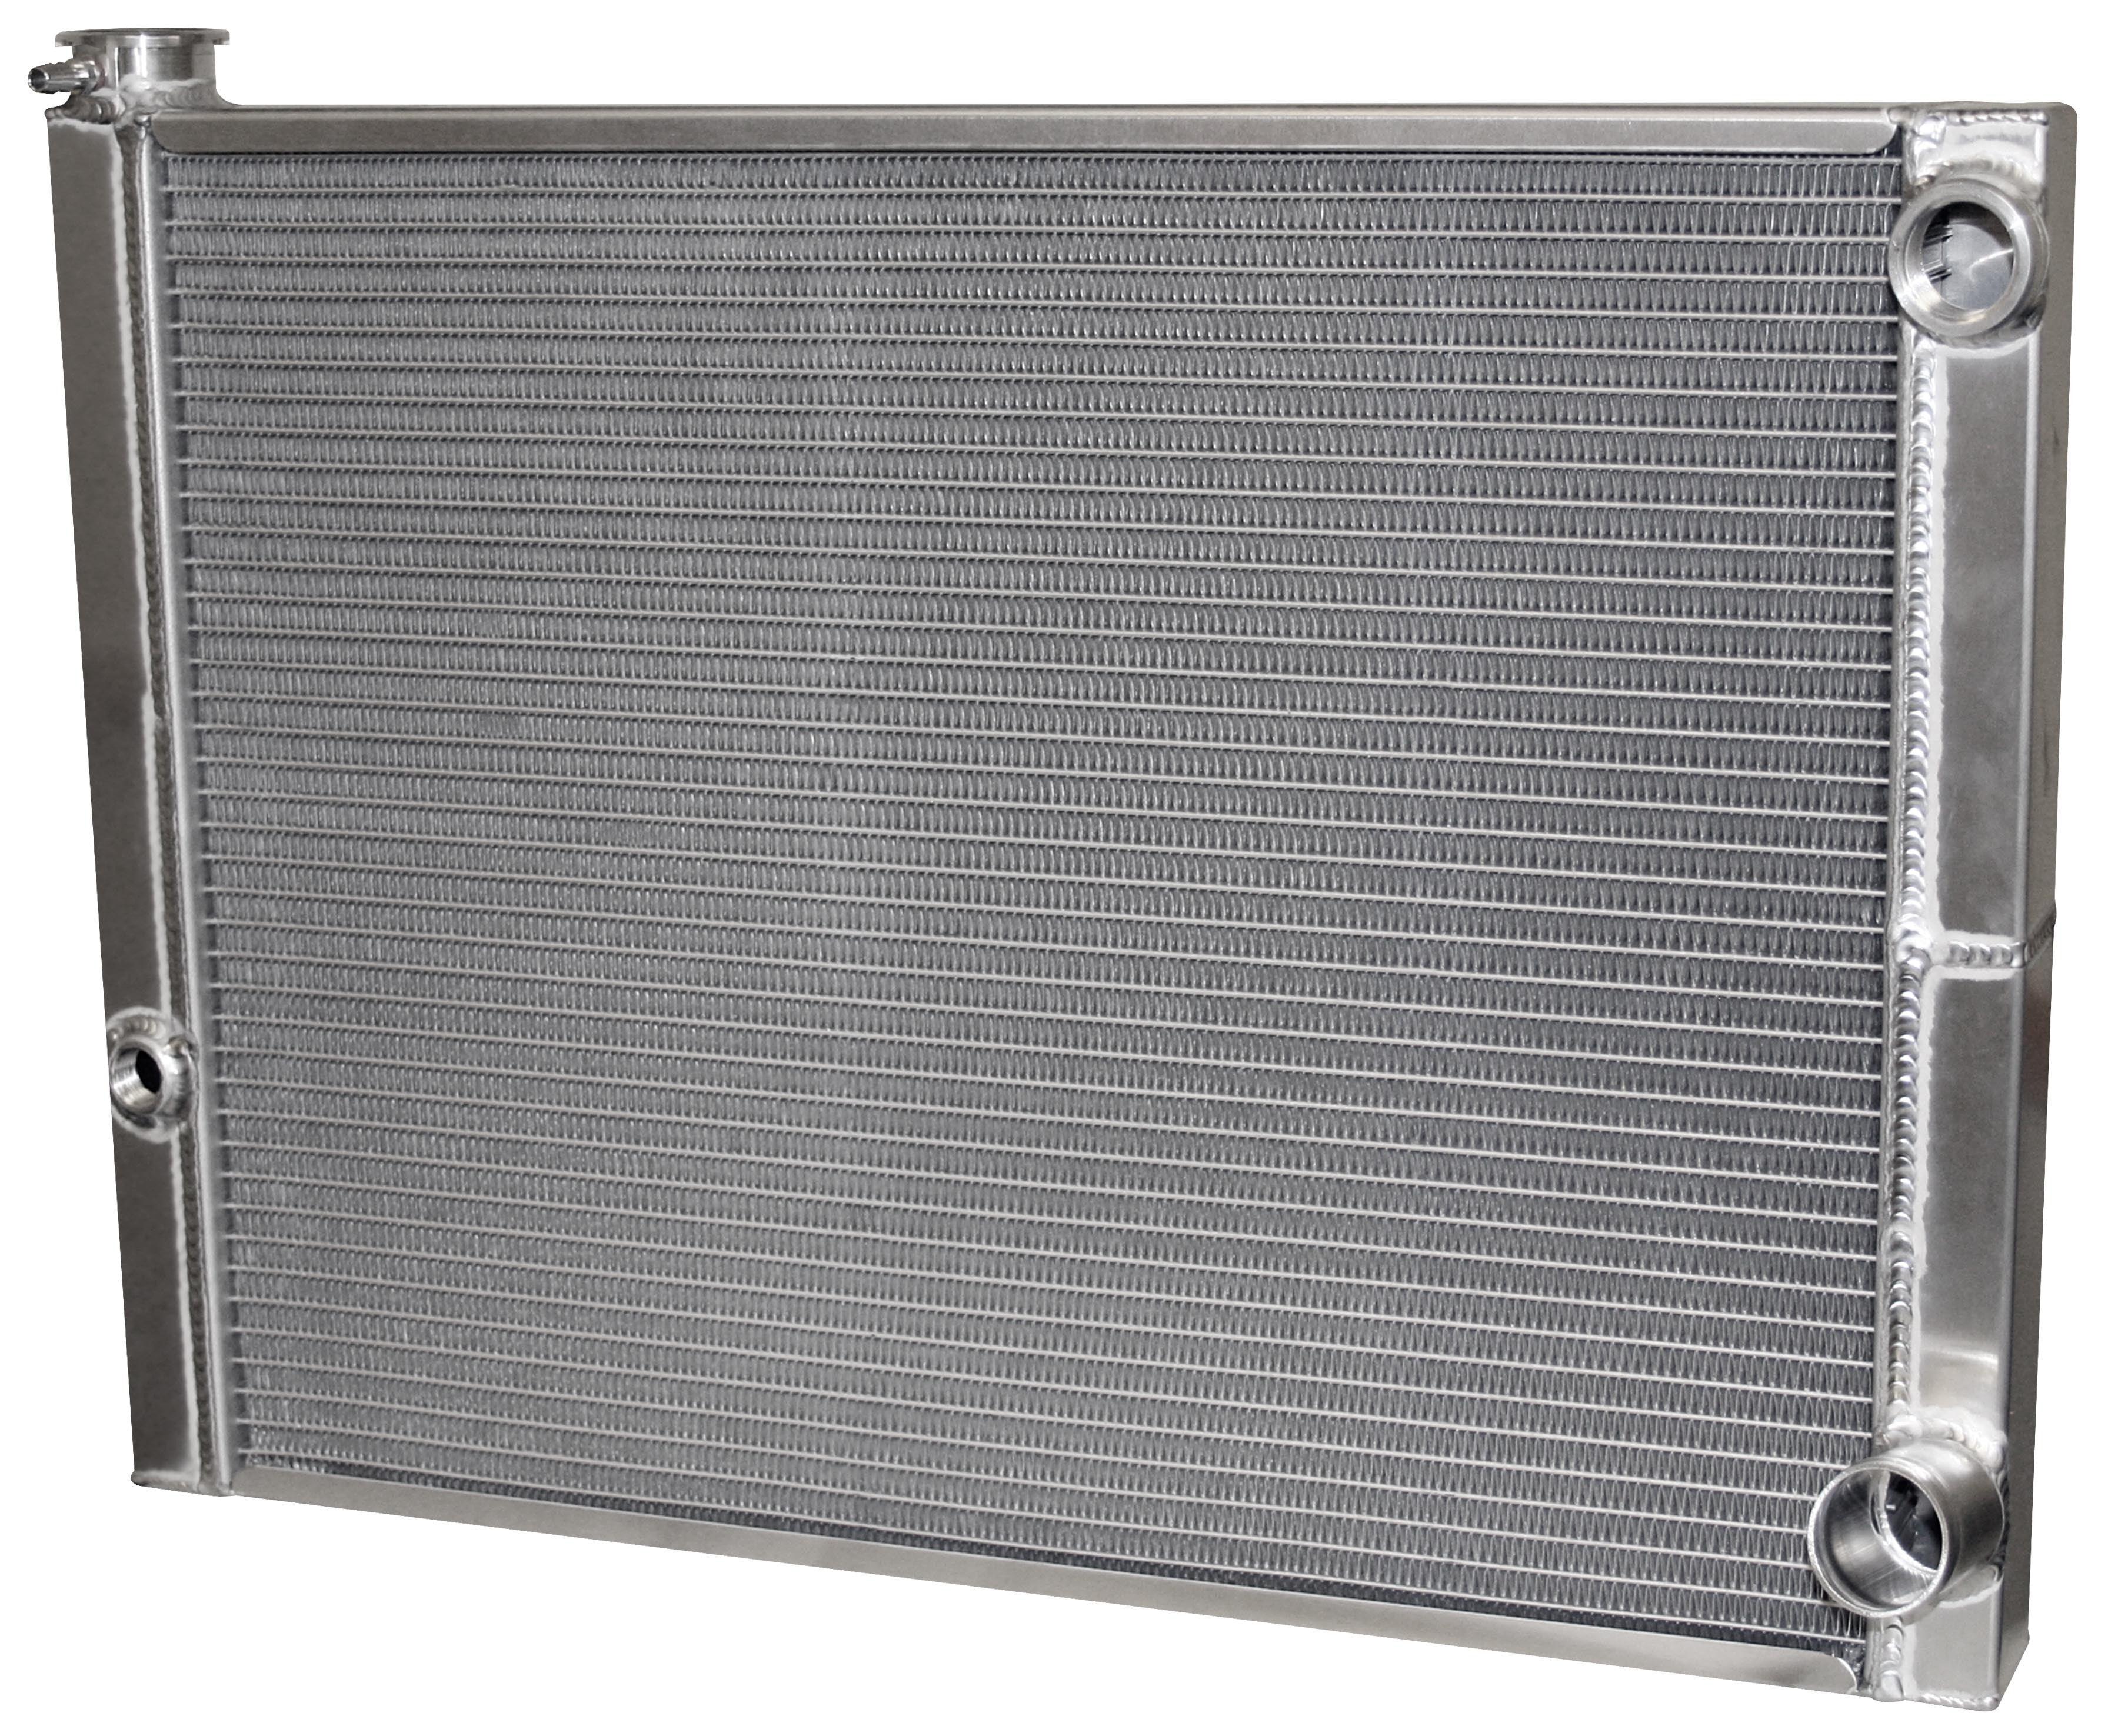 Radiator 26in x 19in DBL Chevy -16an Inlet - Burlile Performance Products